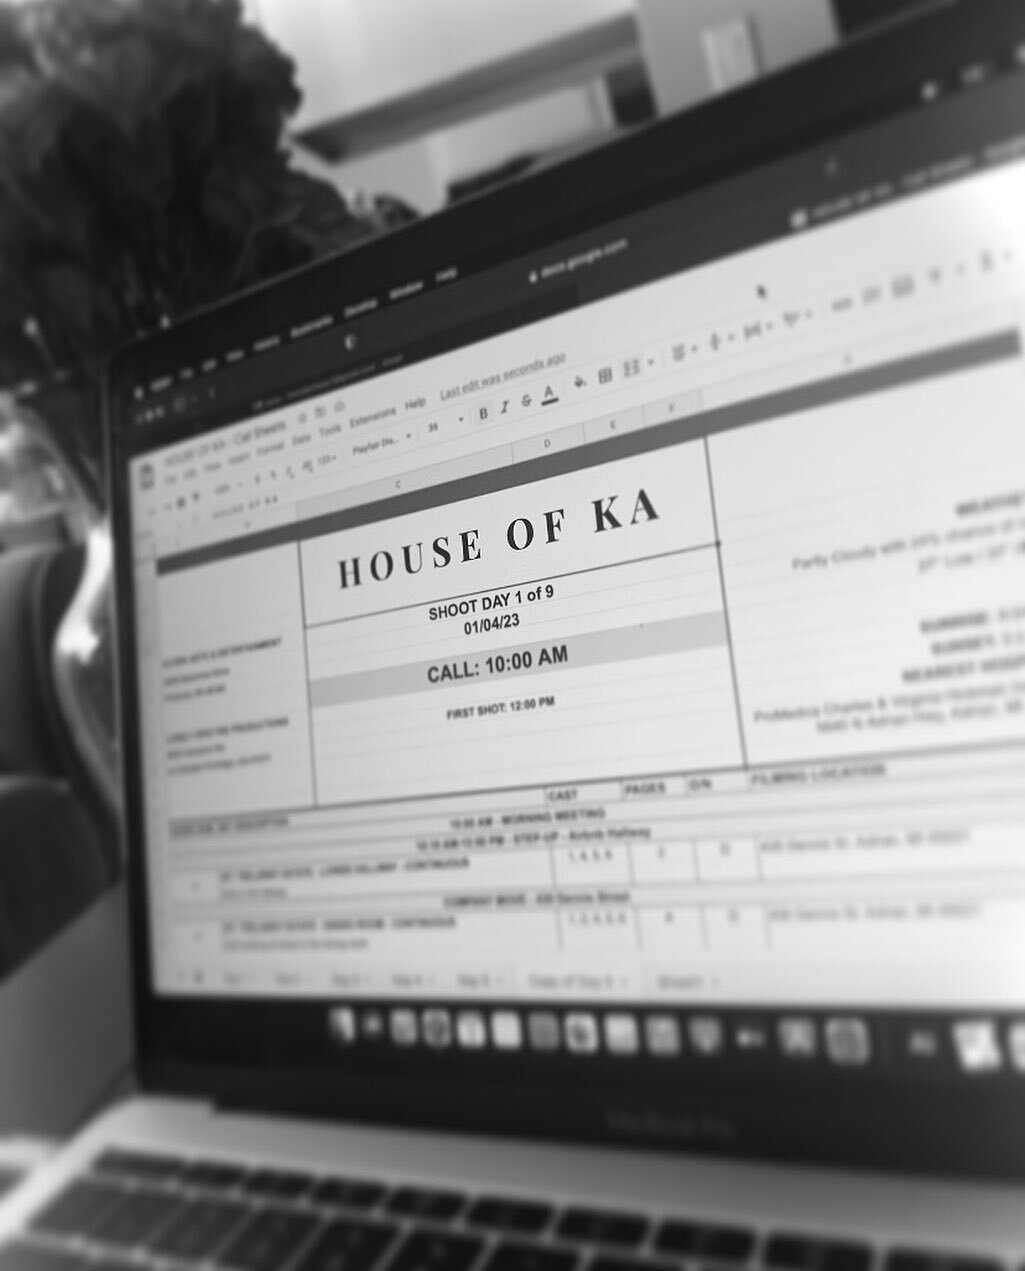 New year, new production! 🎬 @houseofkamovie begins filming today. Best of luck to the entire cast and crew! #houseofka #tellyourmummies
.
.
.
#hippogryphfilms #newyear #lonelyspectreproductions #acornartsandentertainment #featurefilm #horror #horror